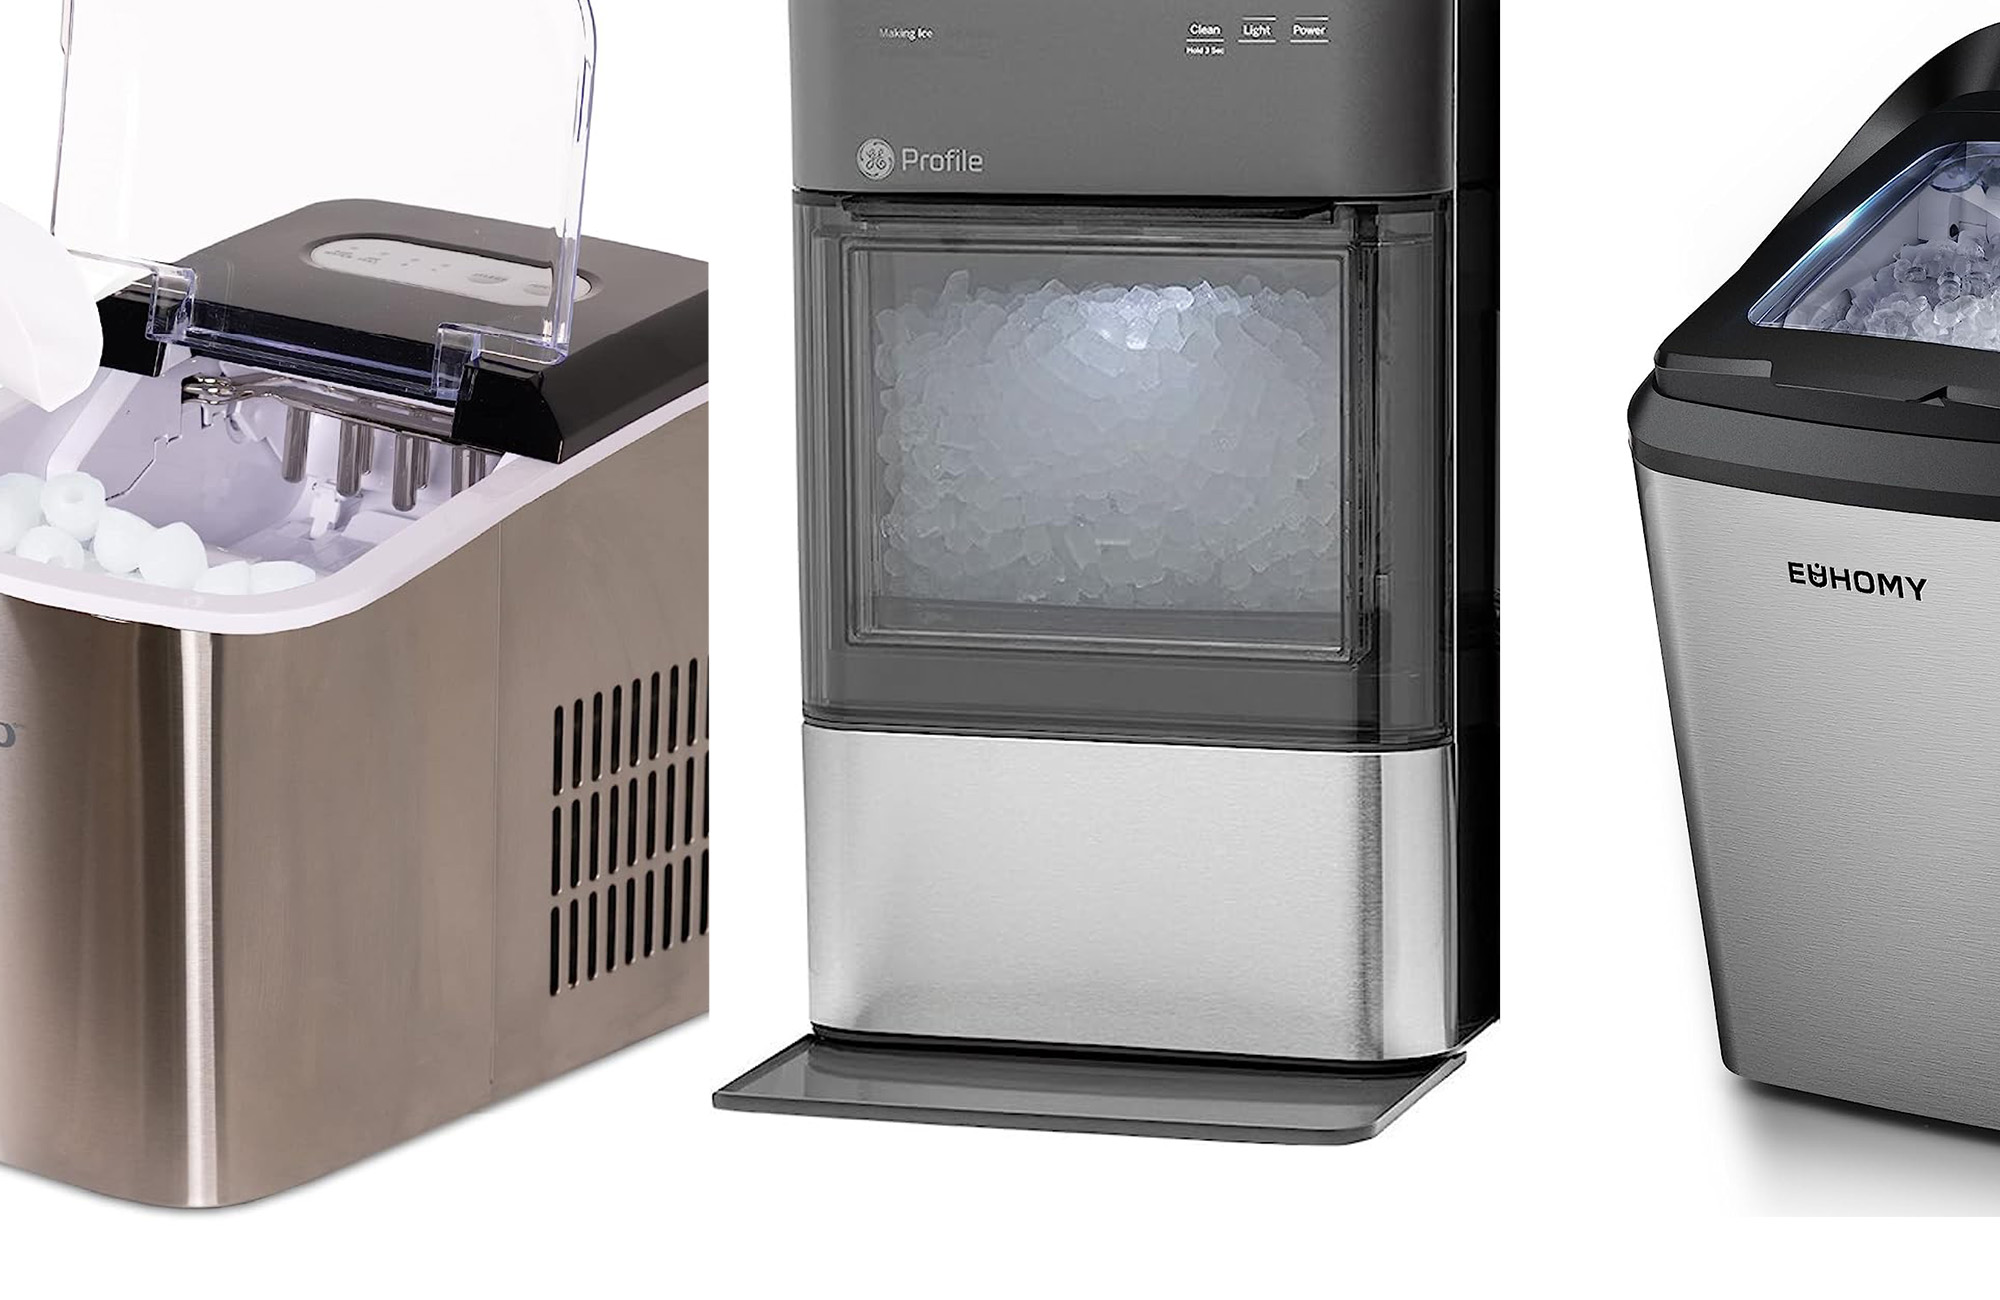 Stay cool and hydrated with one of the best countertop ice makers.